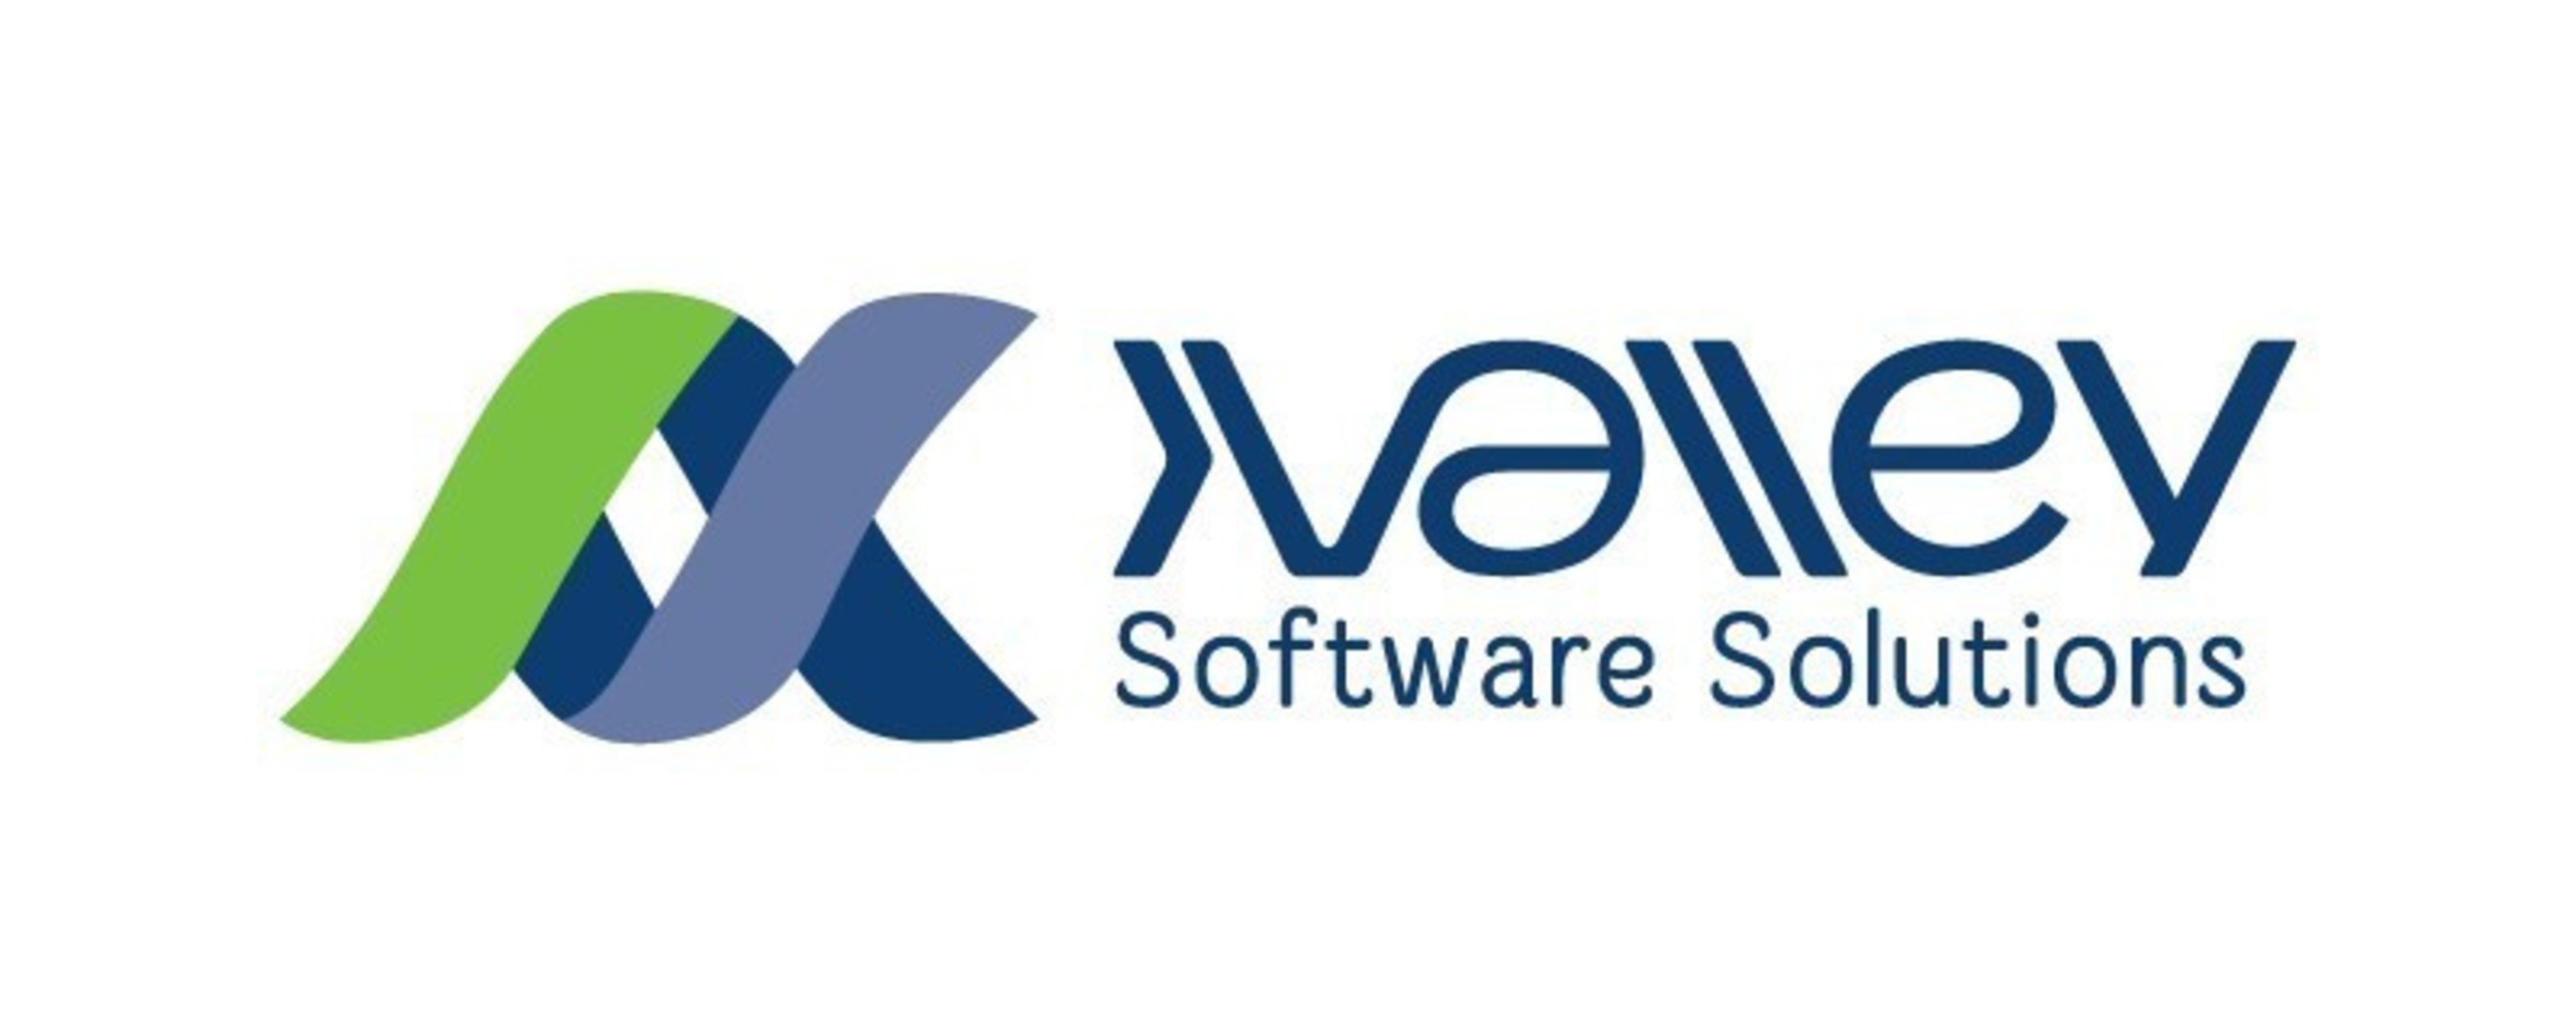 JValley Software Solutions